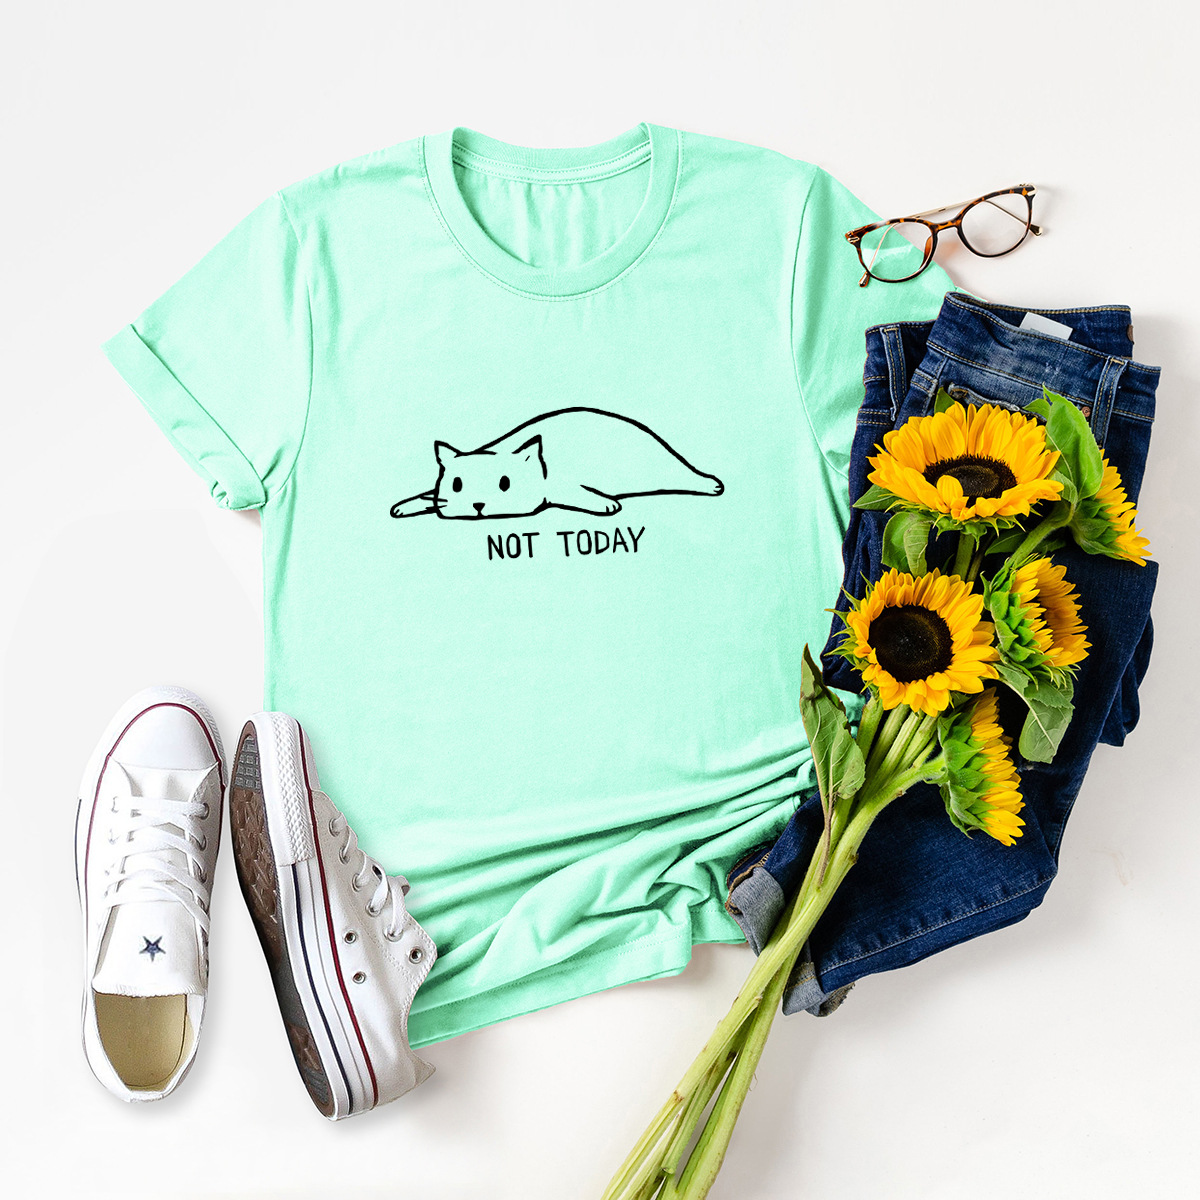  The best designs of the year for a women's T-shirt of pure cotton with short sleeves on it, a graphic clipping accompanied by letters and phrases